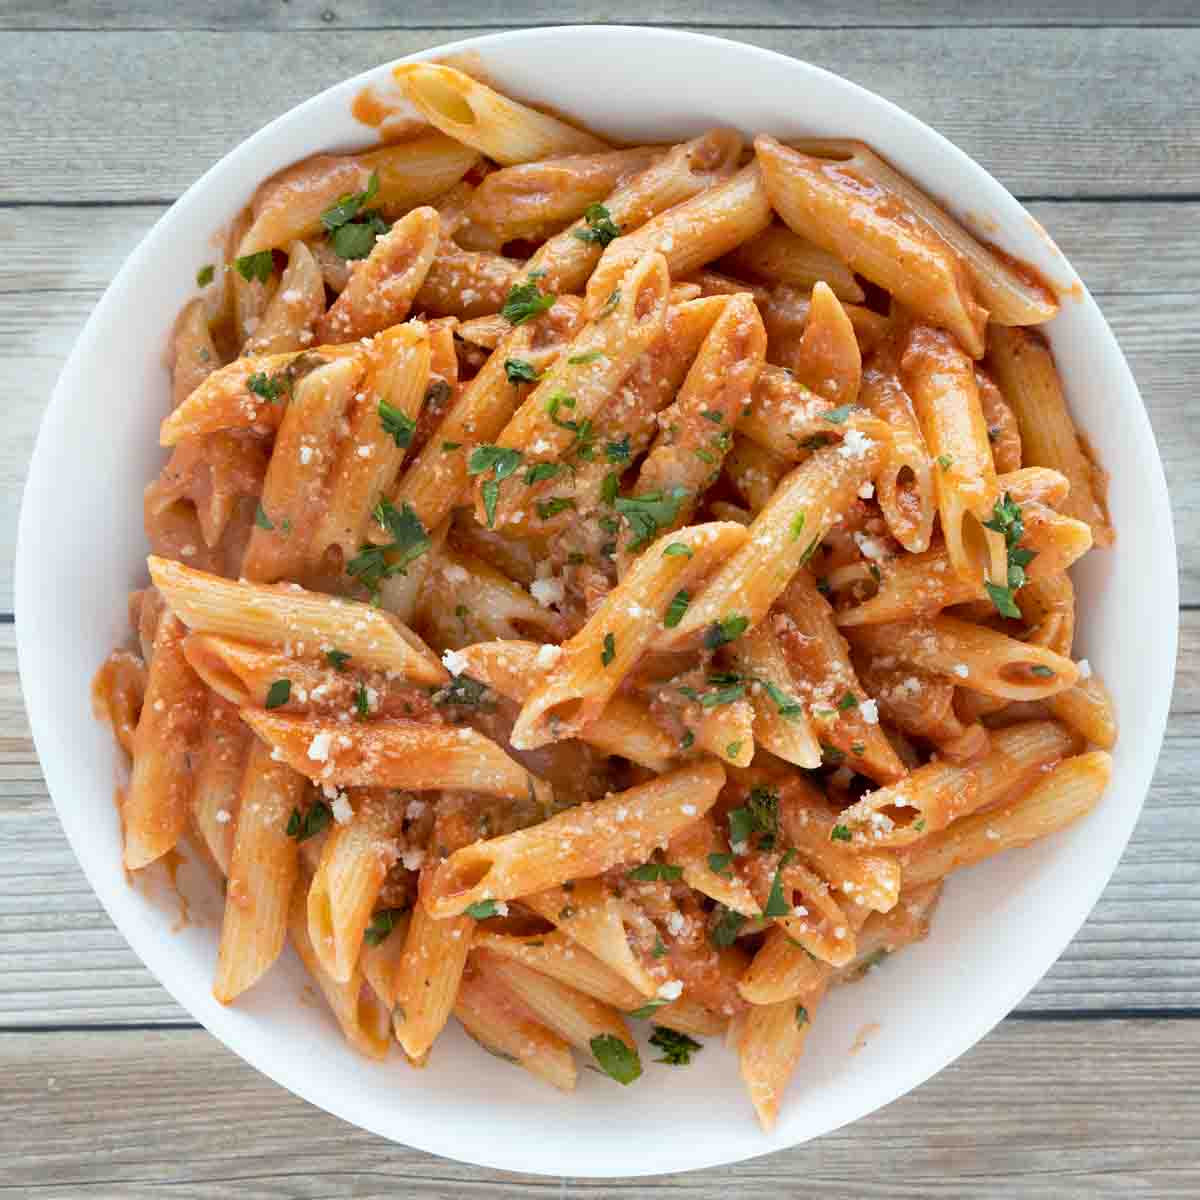 Penne alla Vodka in a white bowl garnished with chopped parsley